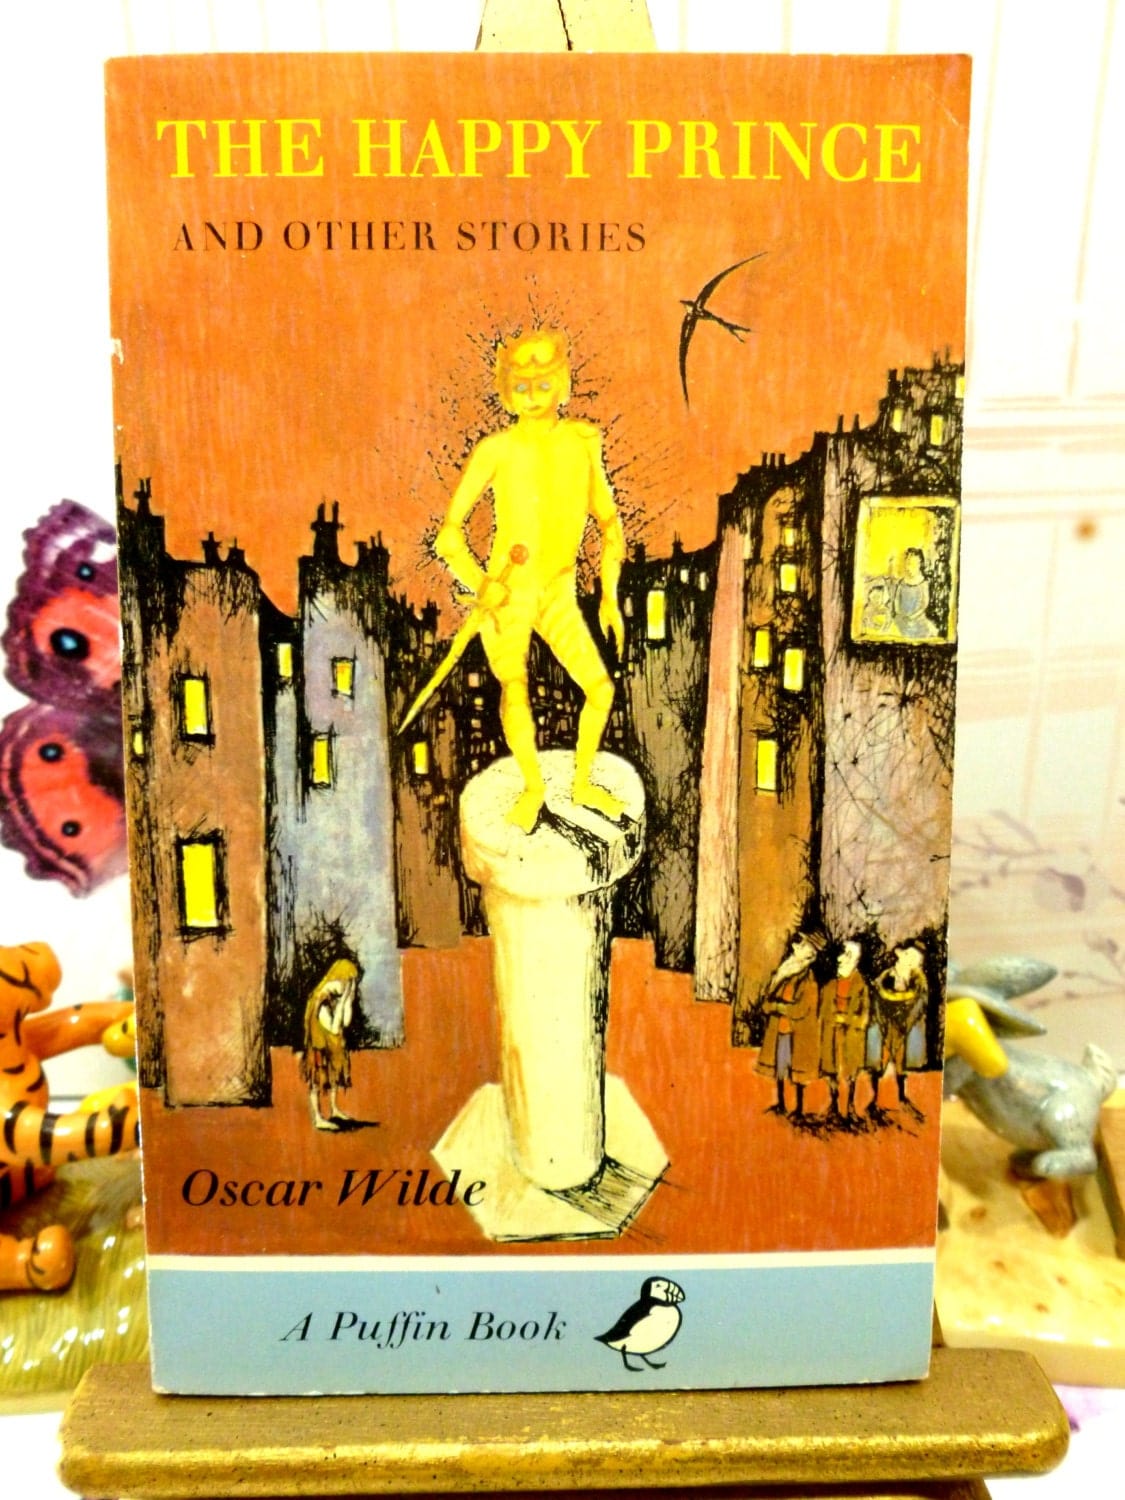 Front cover of The Happy Prince and other Stories Classic Childrens Book Vintage Puffin Book Paperback 1970s showing the golden statue of the prince and the swallow.